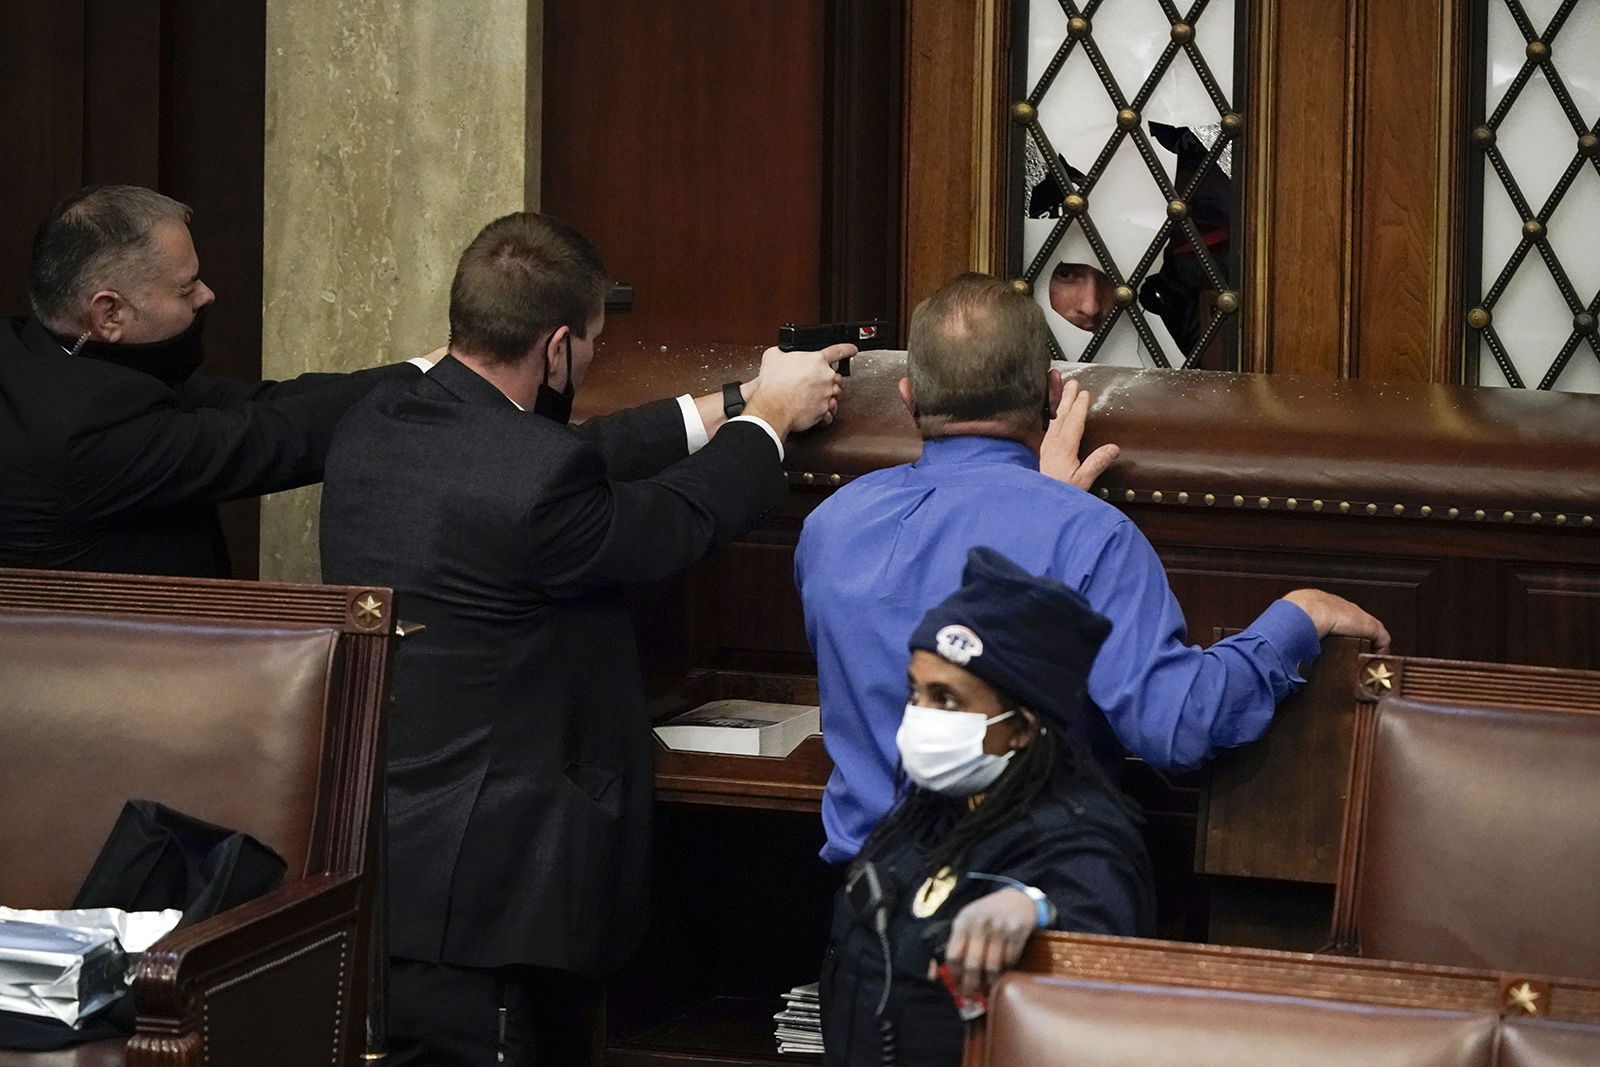 FILE - In this Jan. 6, 2021, file photo U.S. Capitol Police officers with guns drawn and Rep. Troy Nehls, R-Texas, in blue shirt, watch as insurrections loyal to President Donald Trump try to break into the House Chamber at the U.S. Capitol in Washington. (AP Photo/J. Scott Applewhite, File)